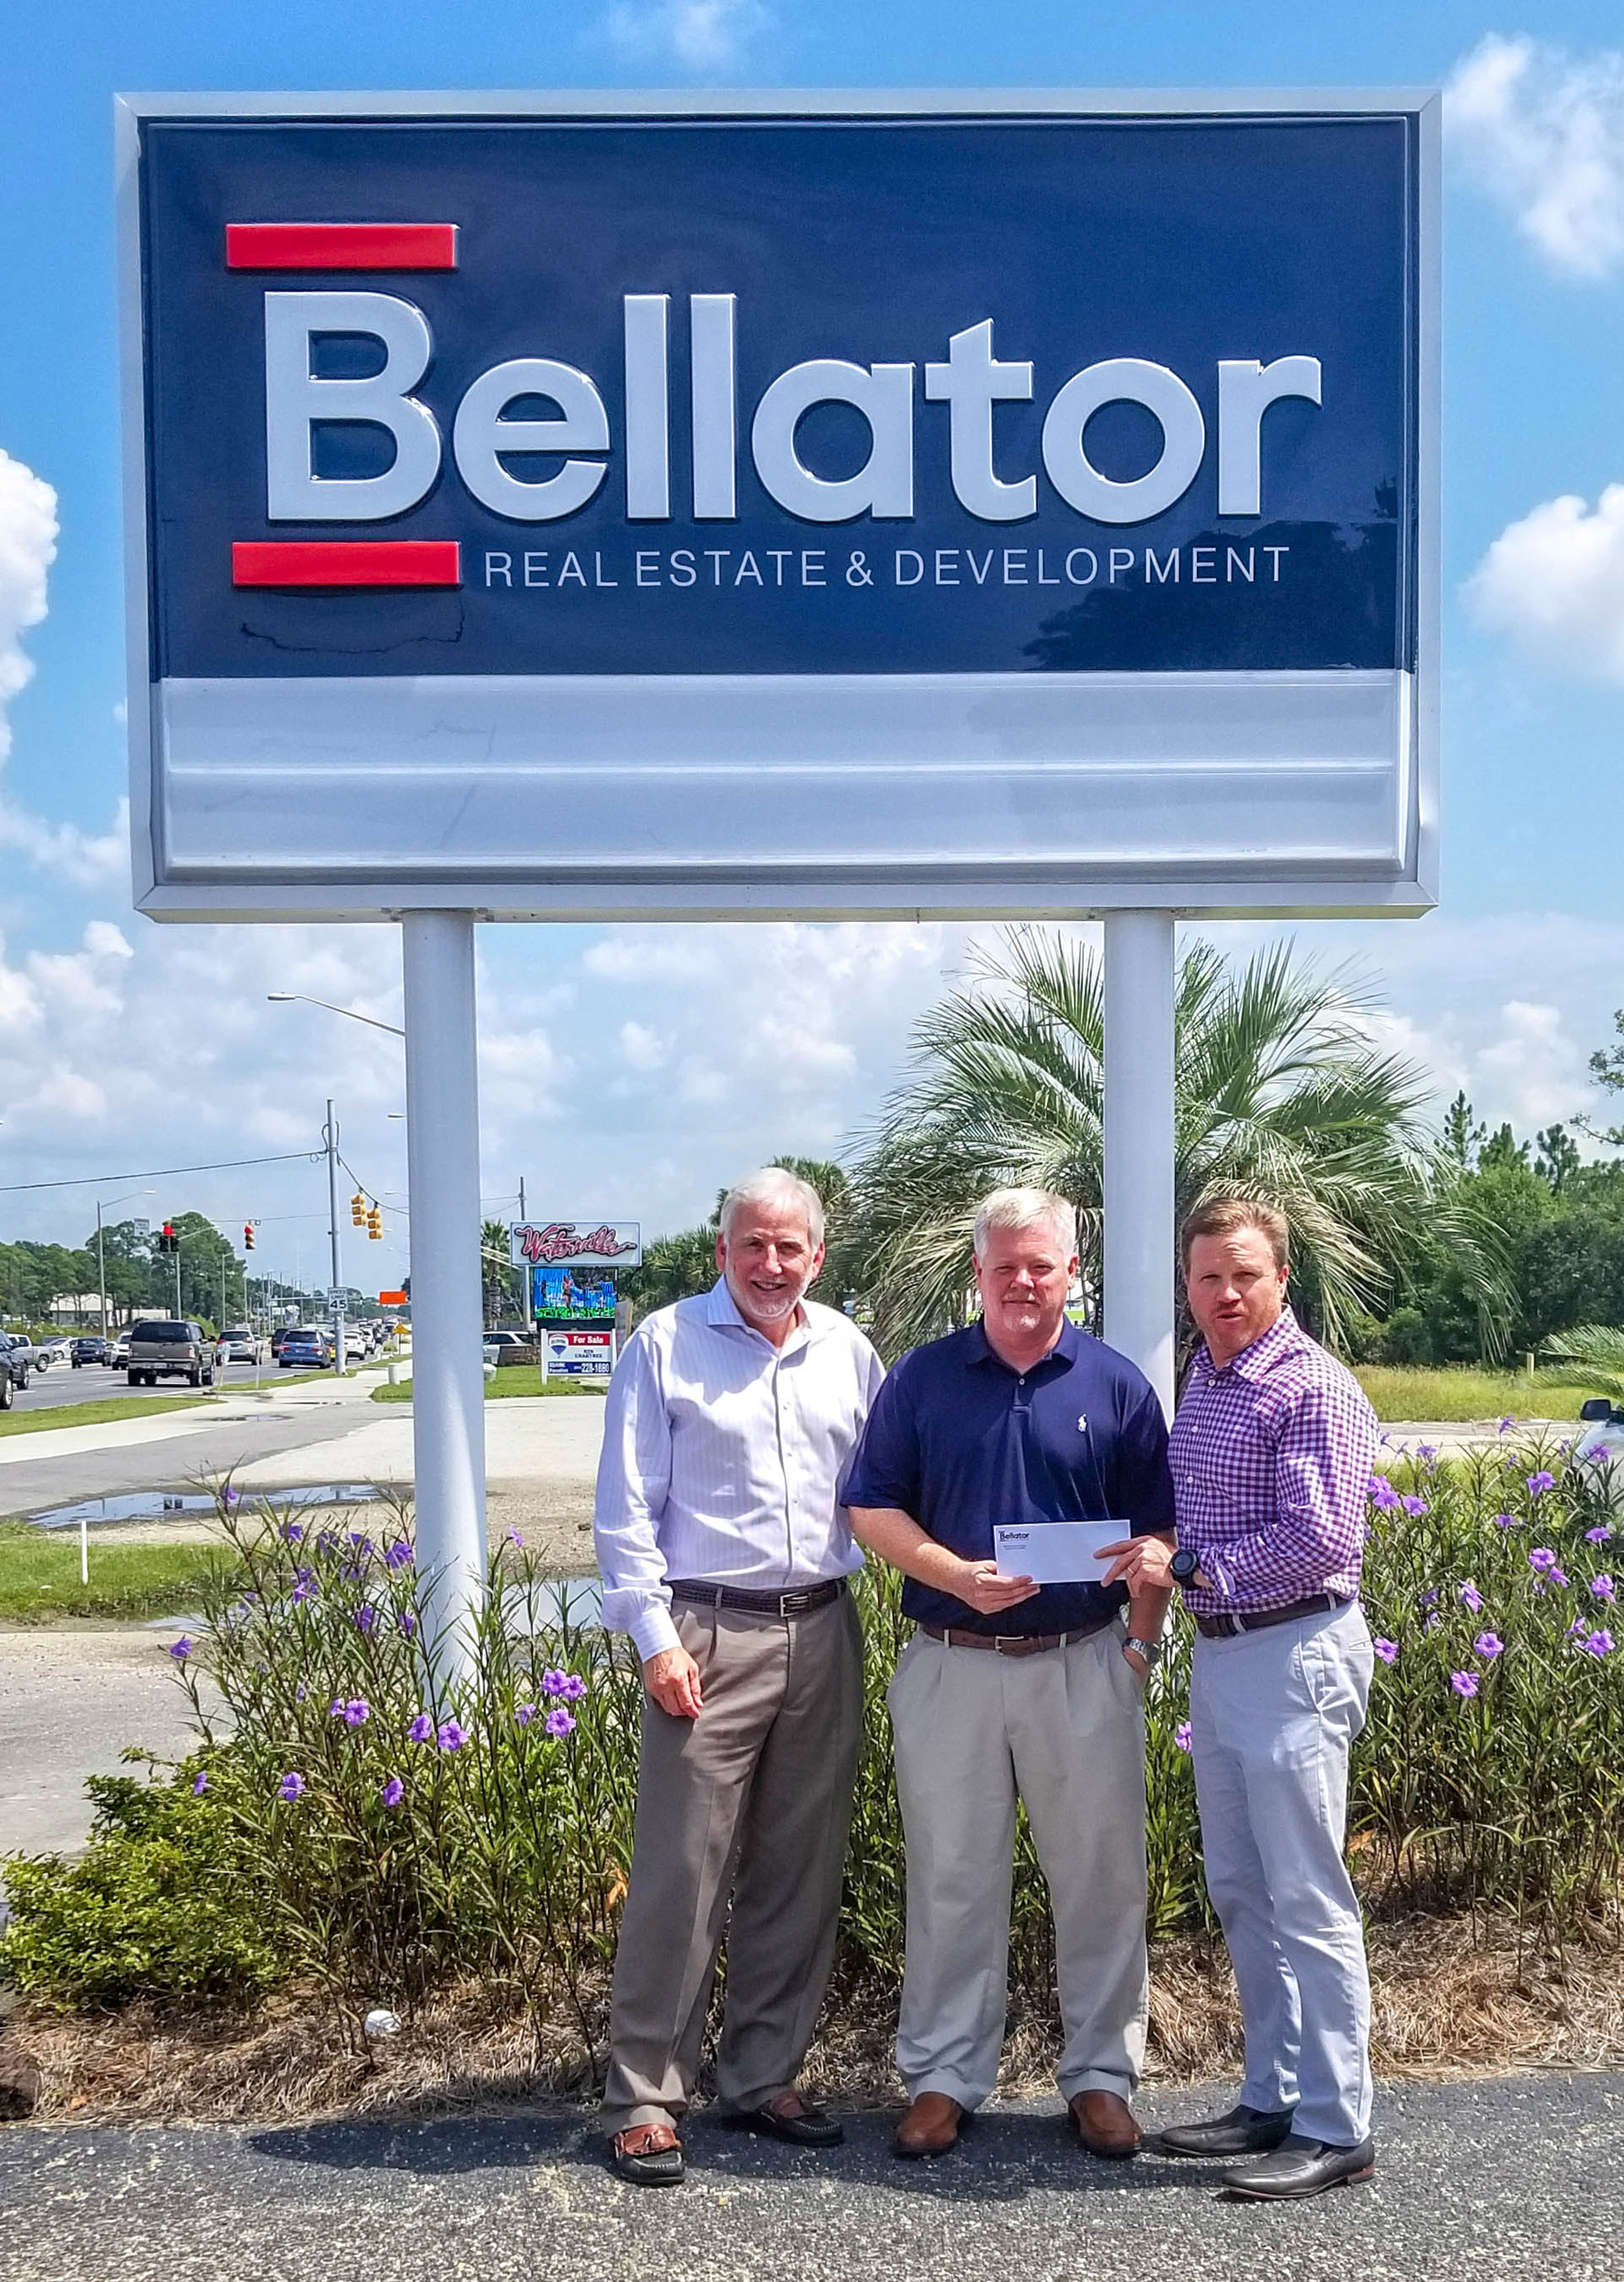 Bellator Real Estate & Development acquires Triple Option Properties: From left, Bellator Gulf Shores Managing Broker Frank Malone, REALTOR® Brad Chambers, formerly of Triple Option Properties, and Bellator President Troy Wilson stand in front of the Gulf Shore’s office sign.